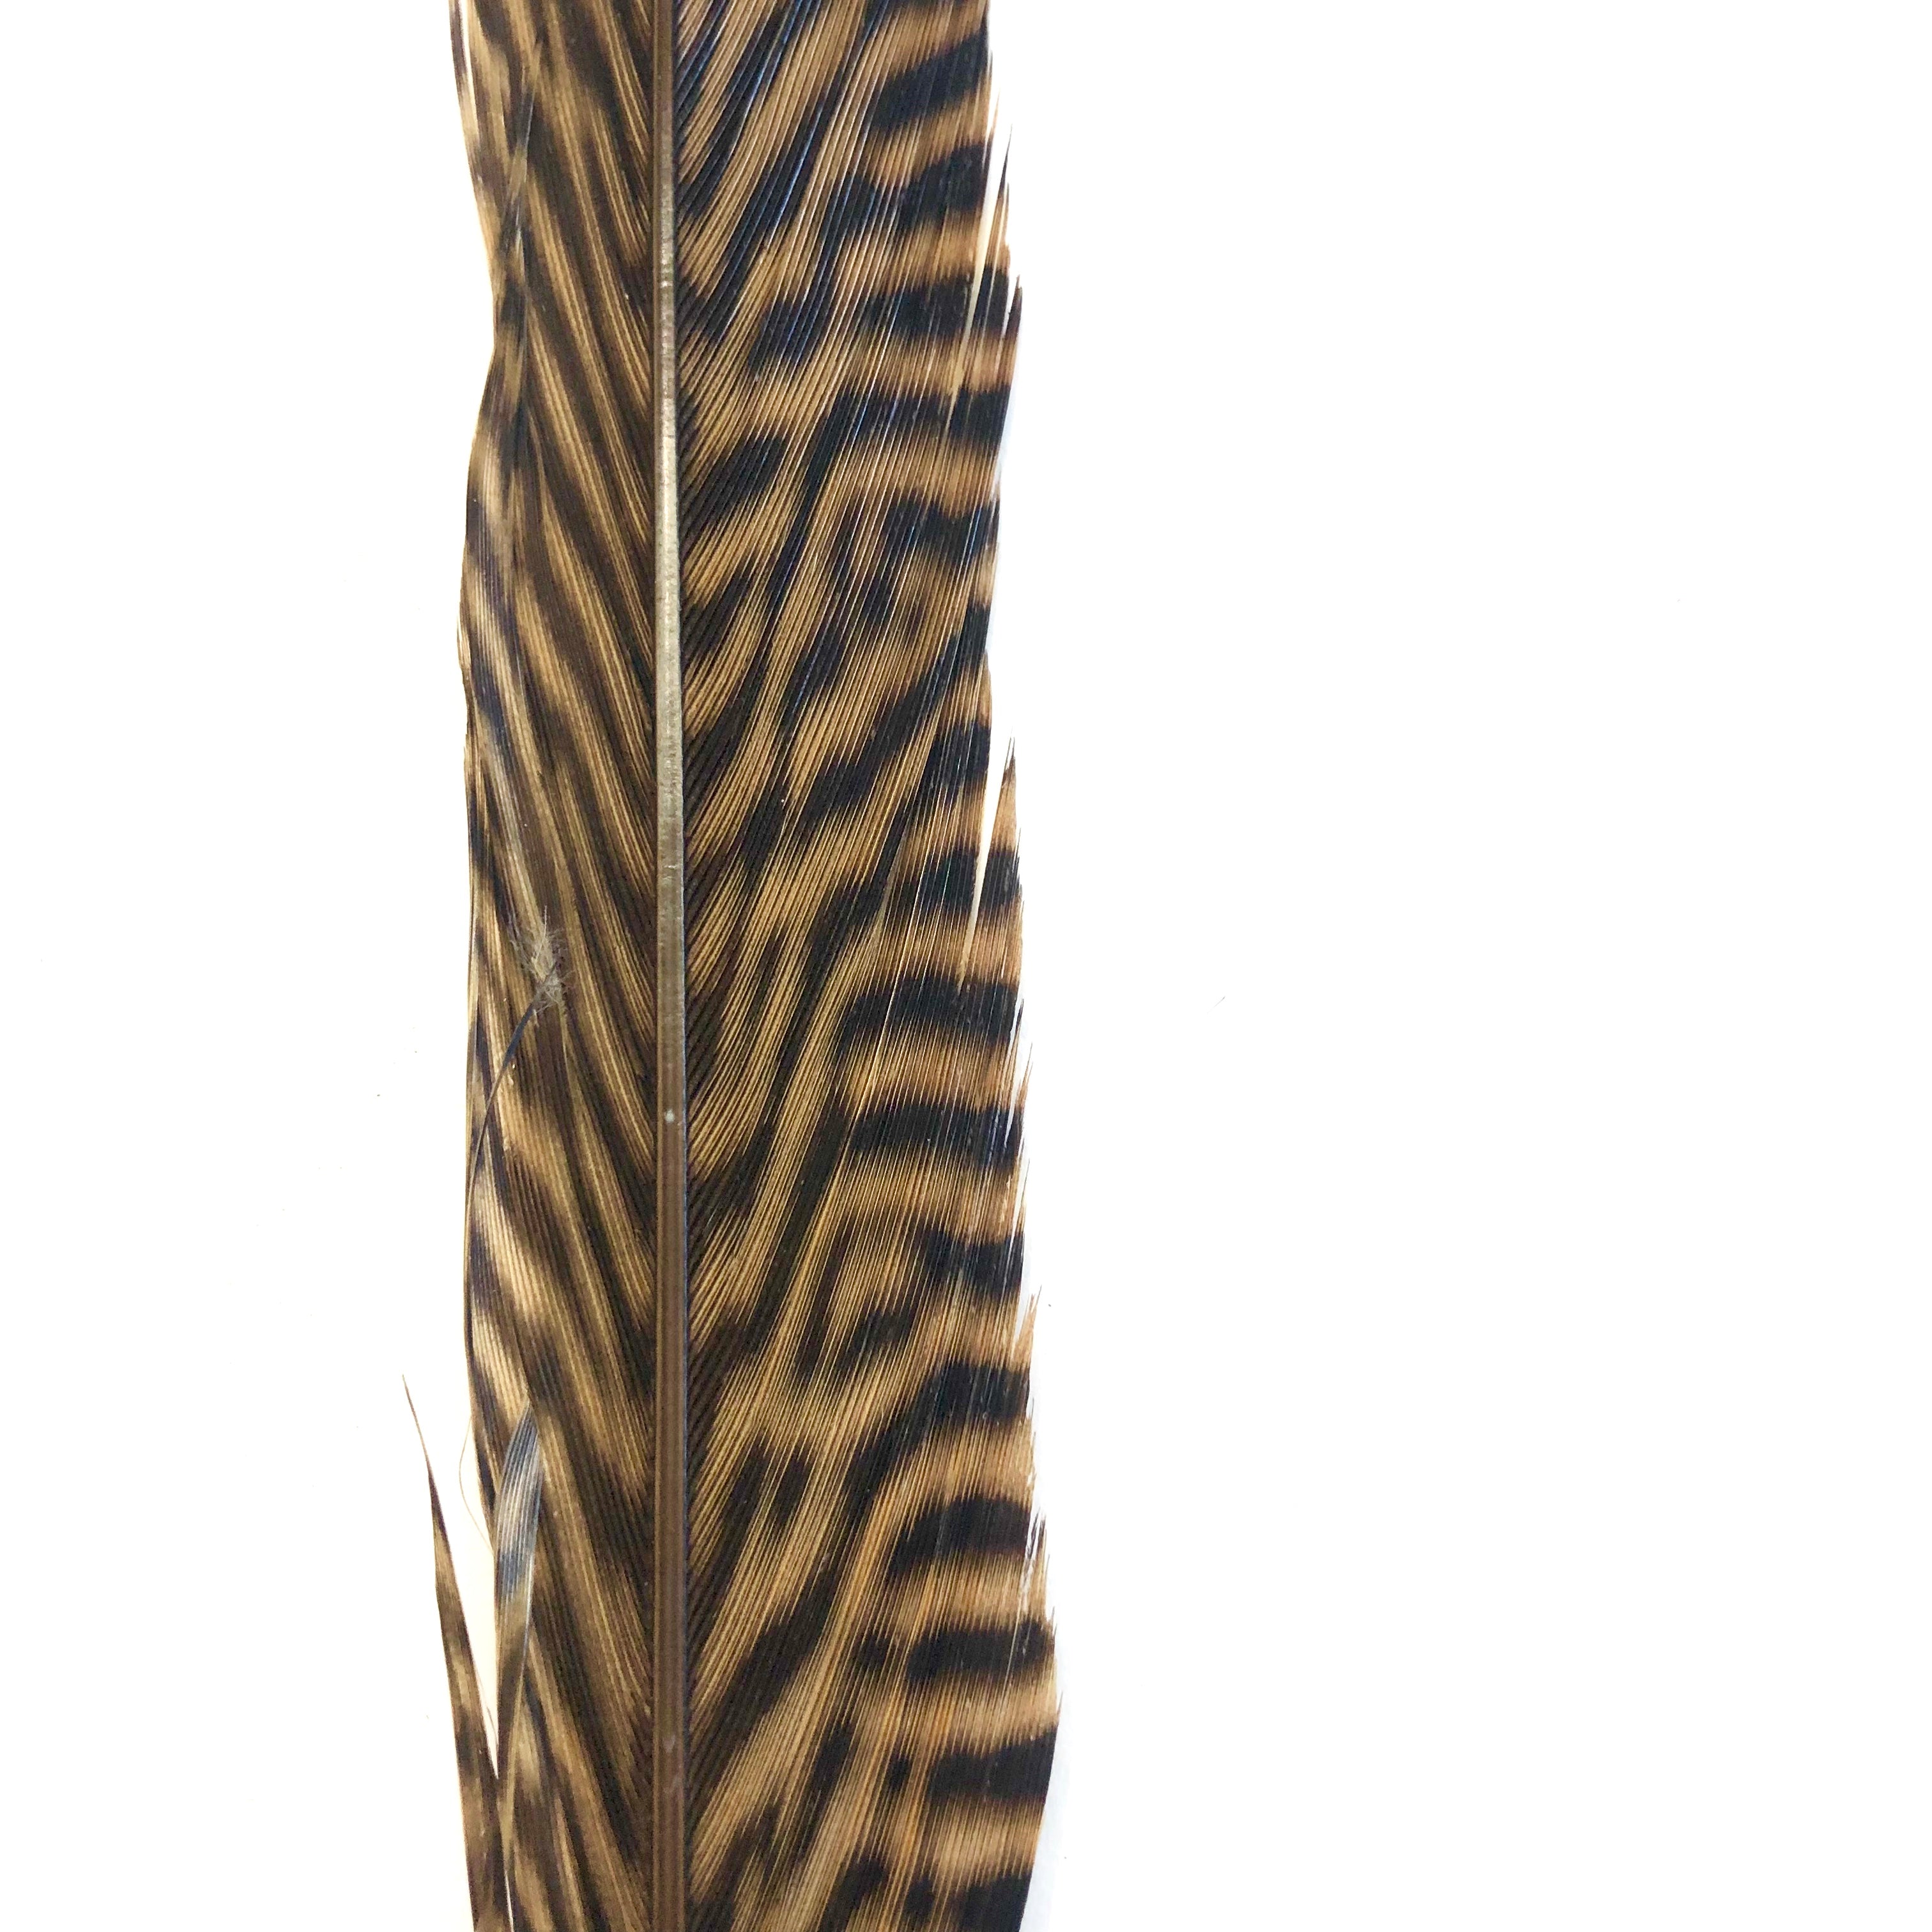 10" to 20" Golden Pheasant Side Tail Feather - Natural